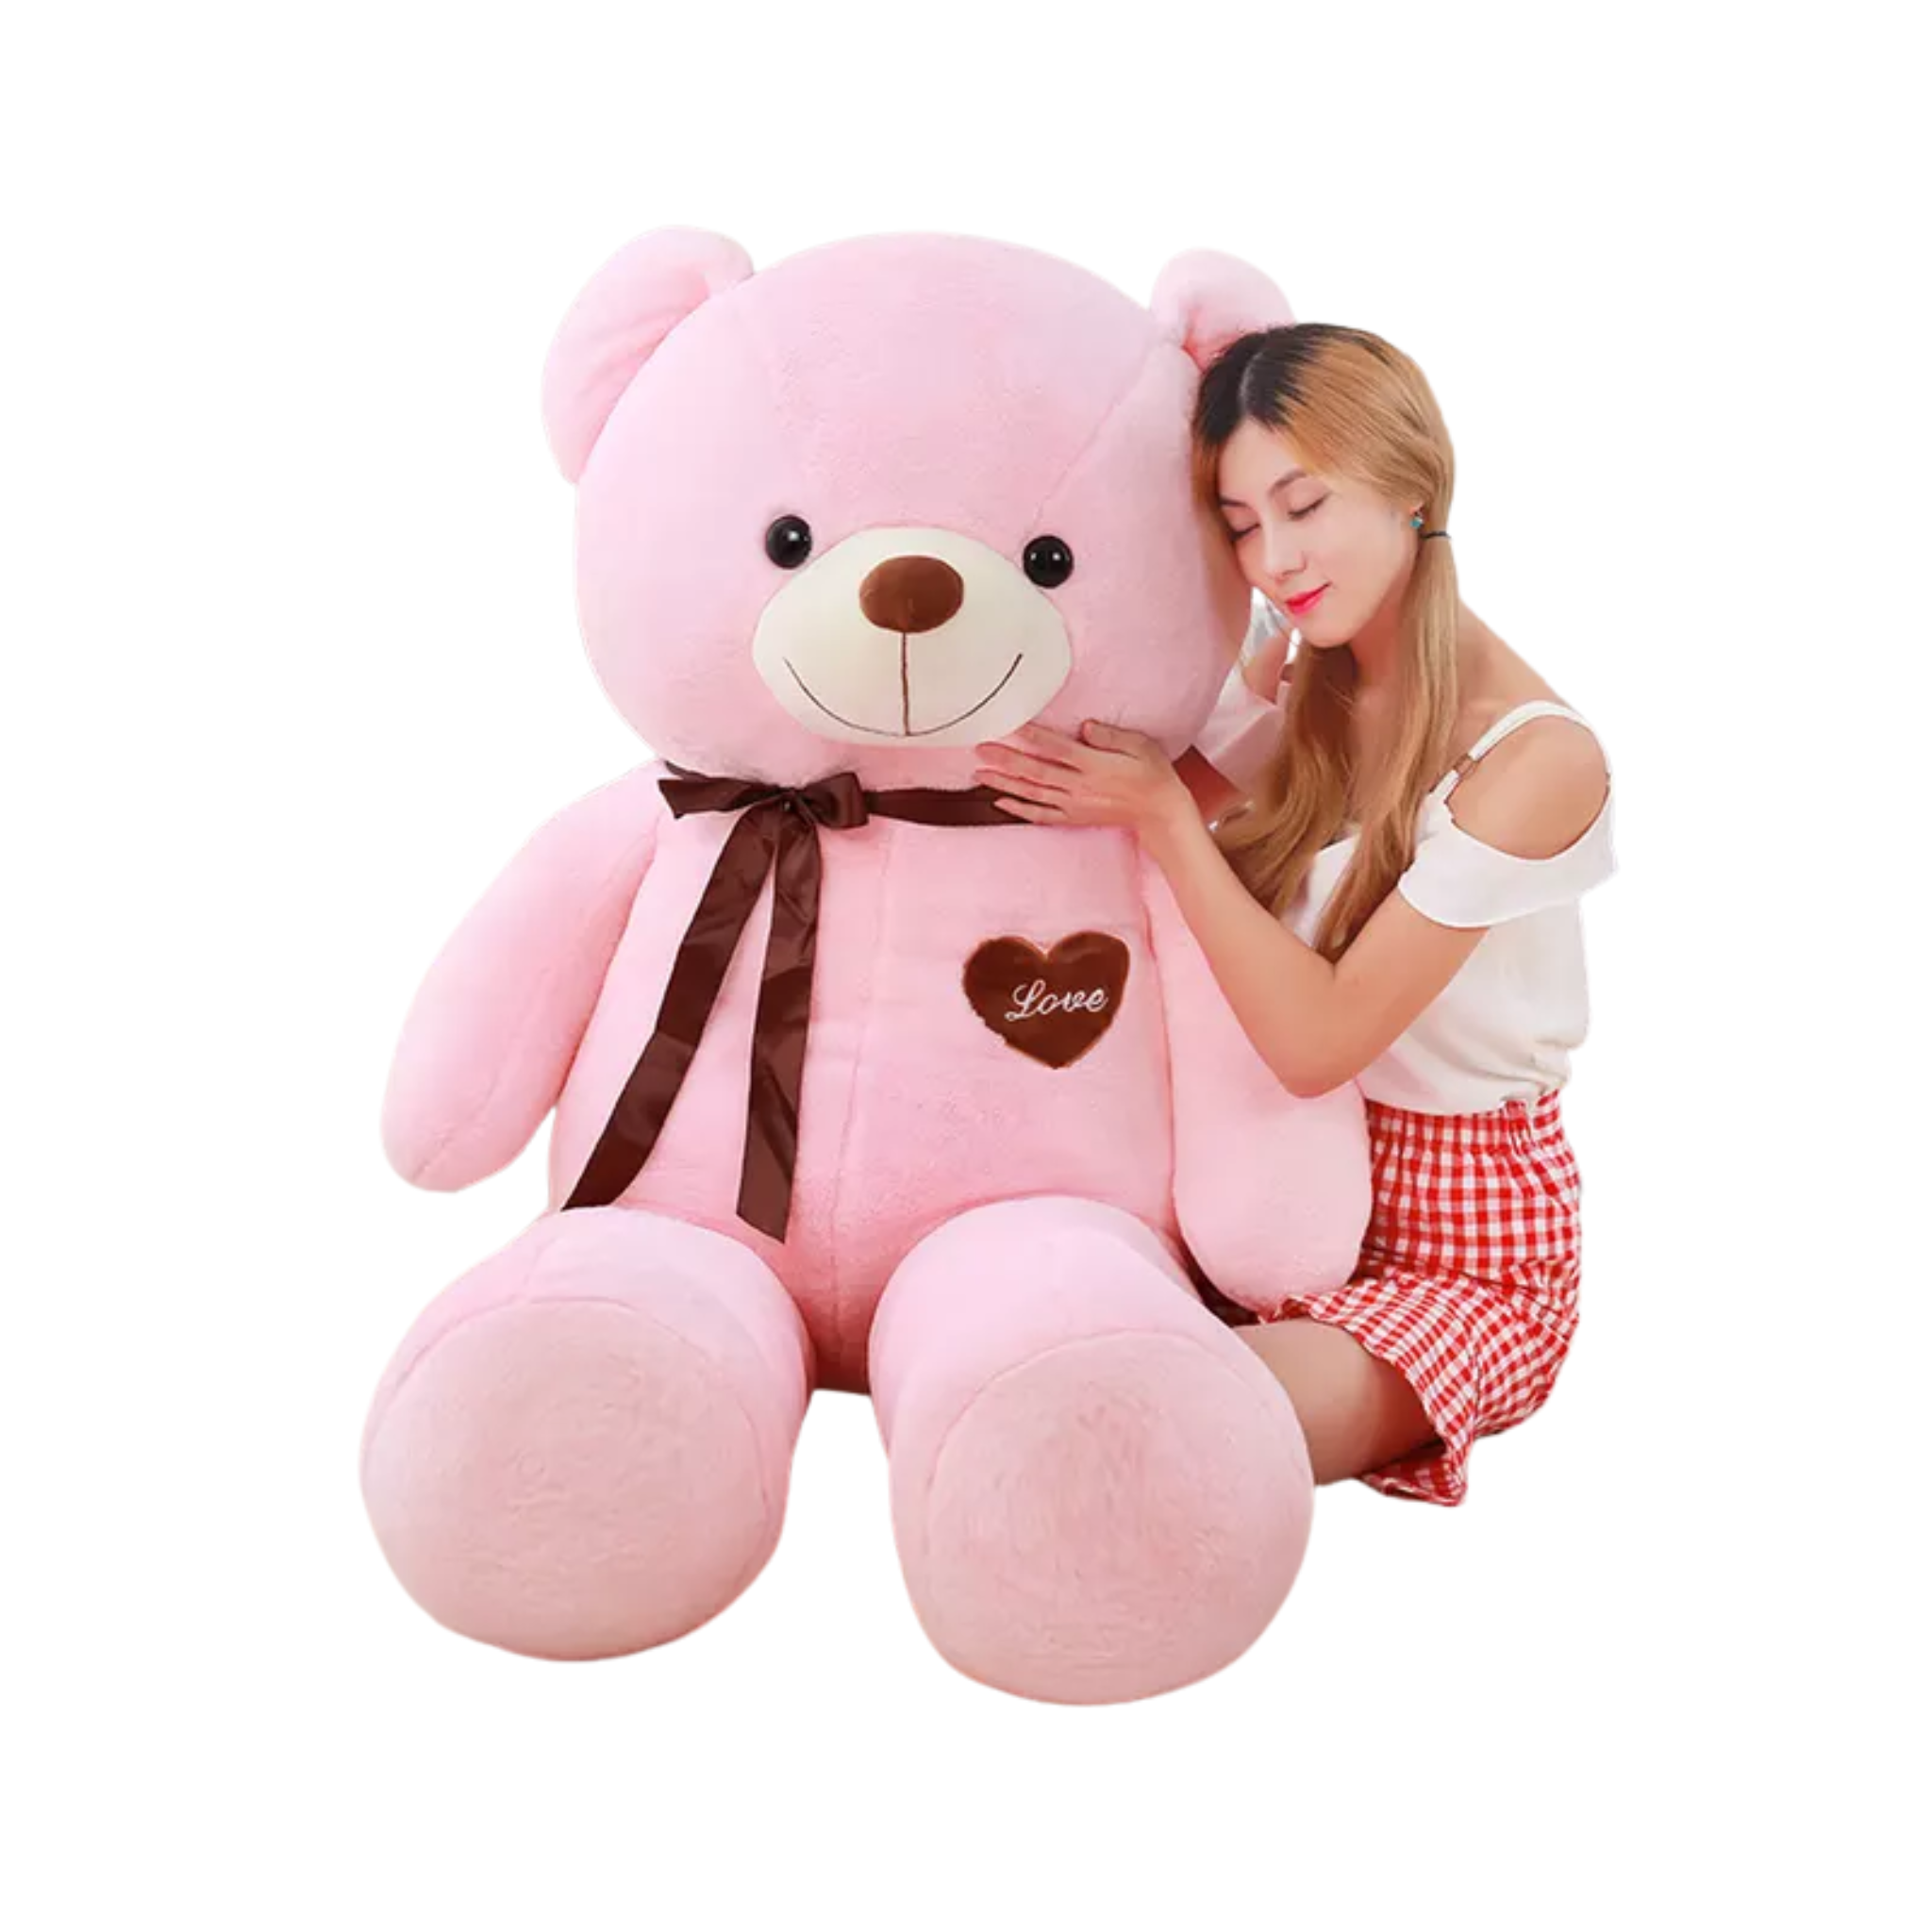 Teddy Bear, Non-Toxic, Soft Stuffed Lovable, for Kids